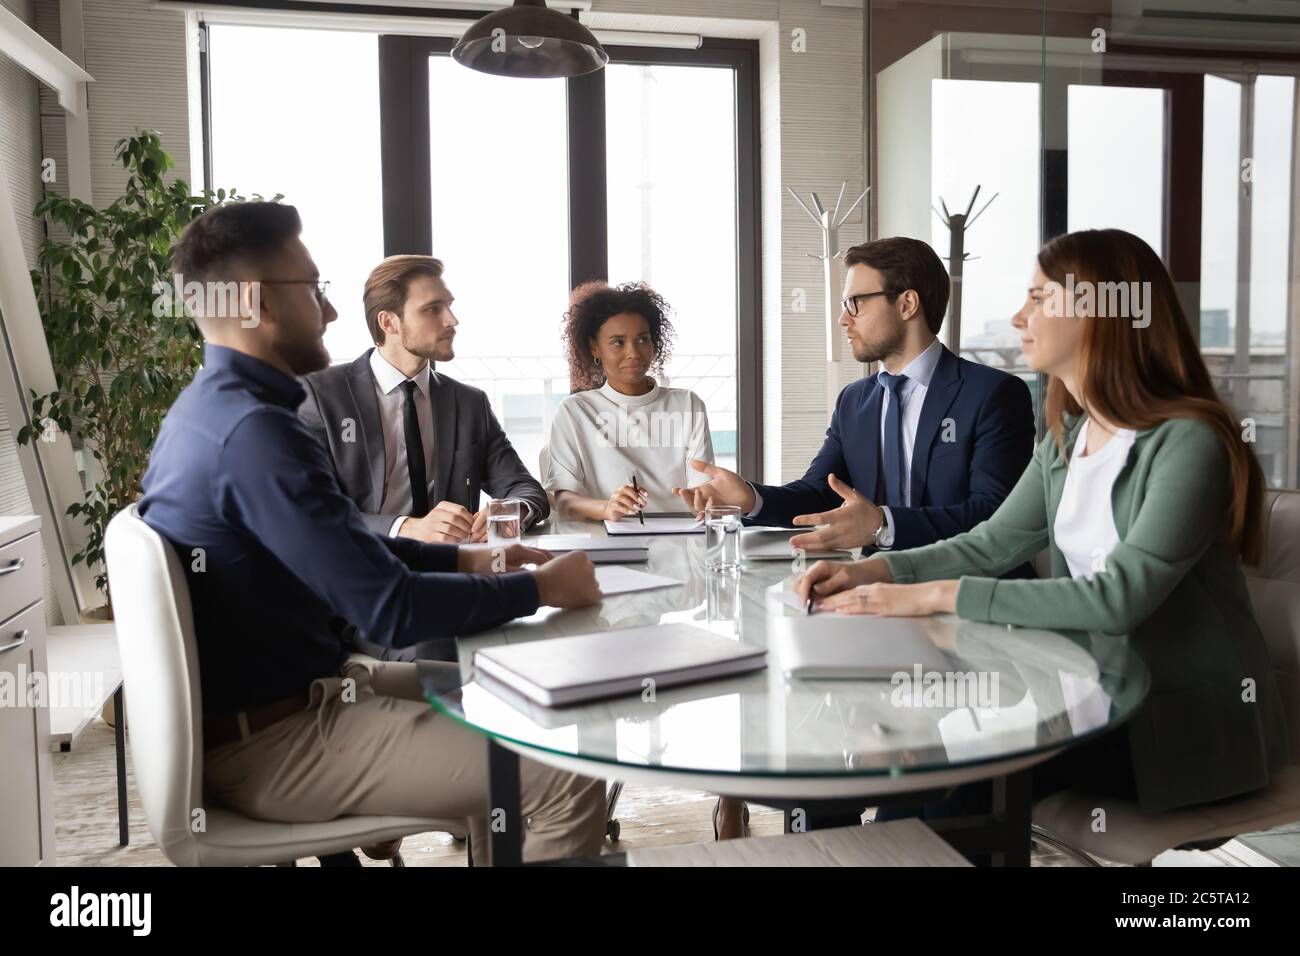 Multiracial employees gather in boardroom engaged in team discussion Stock Photo